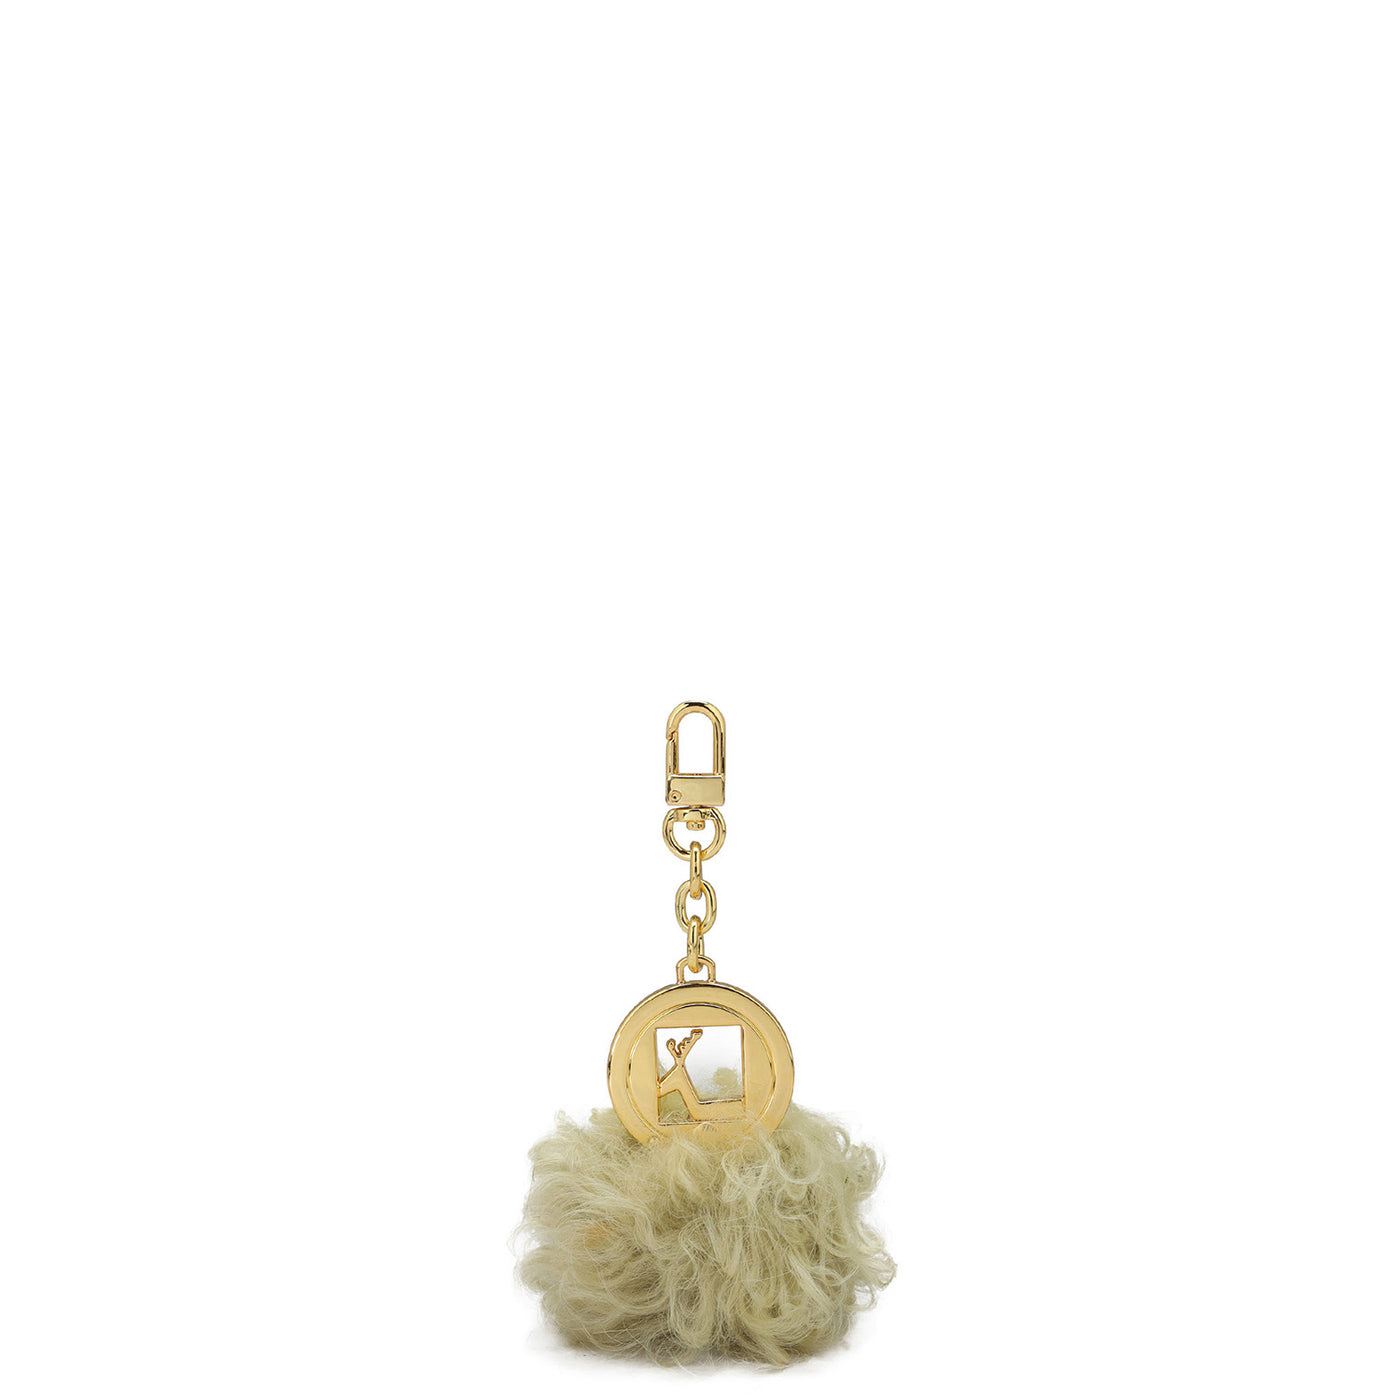 Fur Leather Bag Hanging - Off White